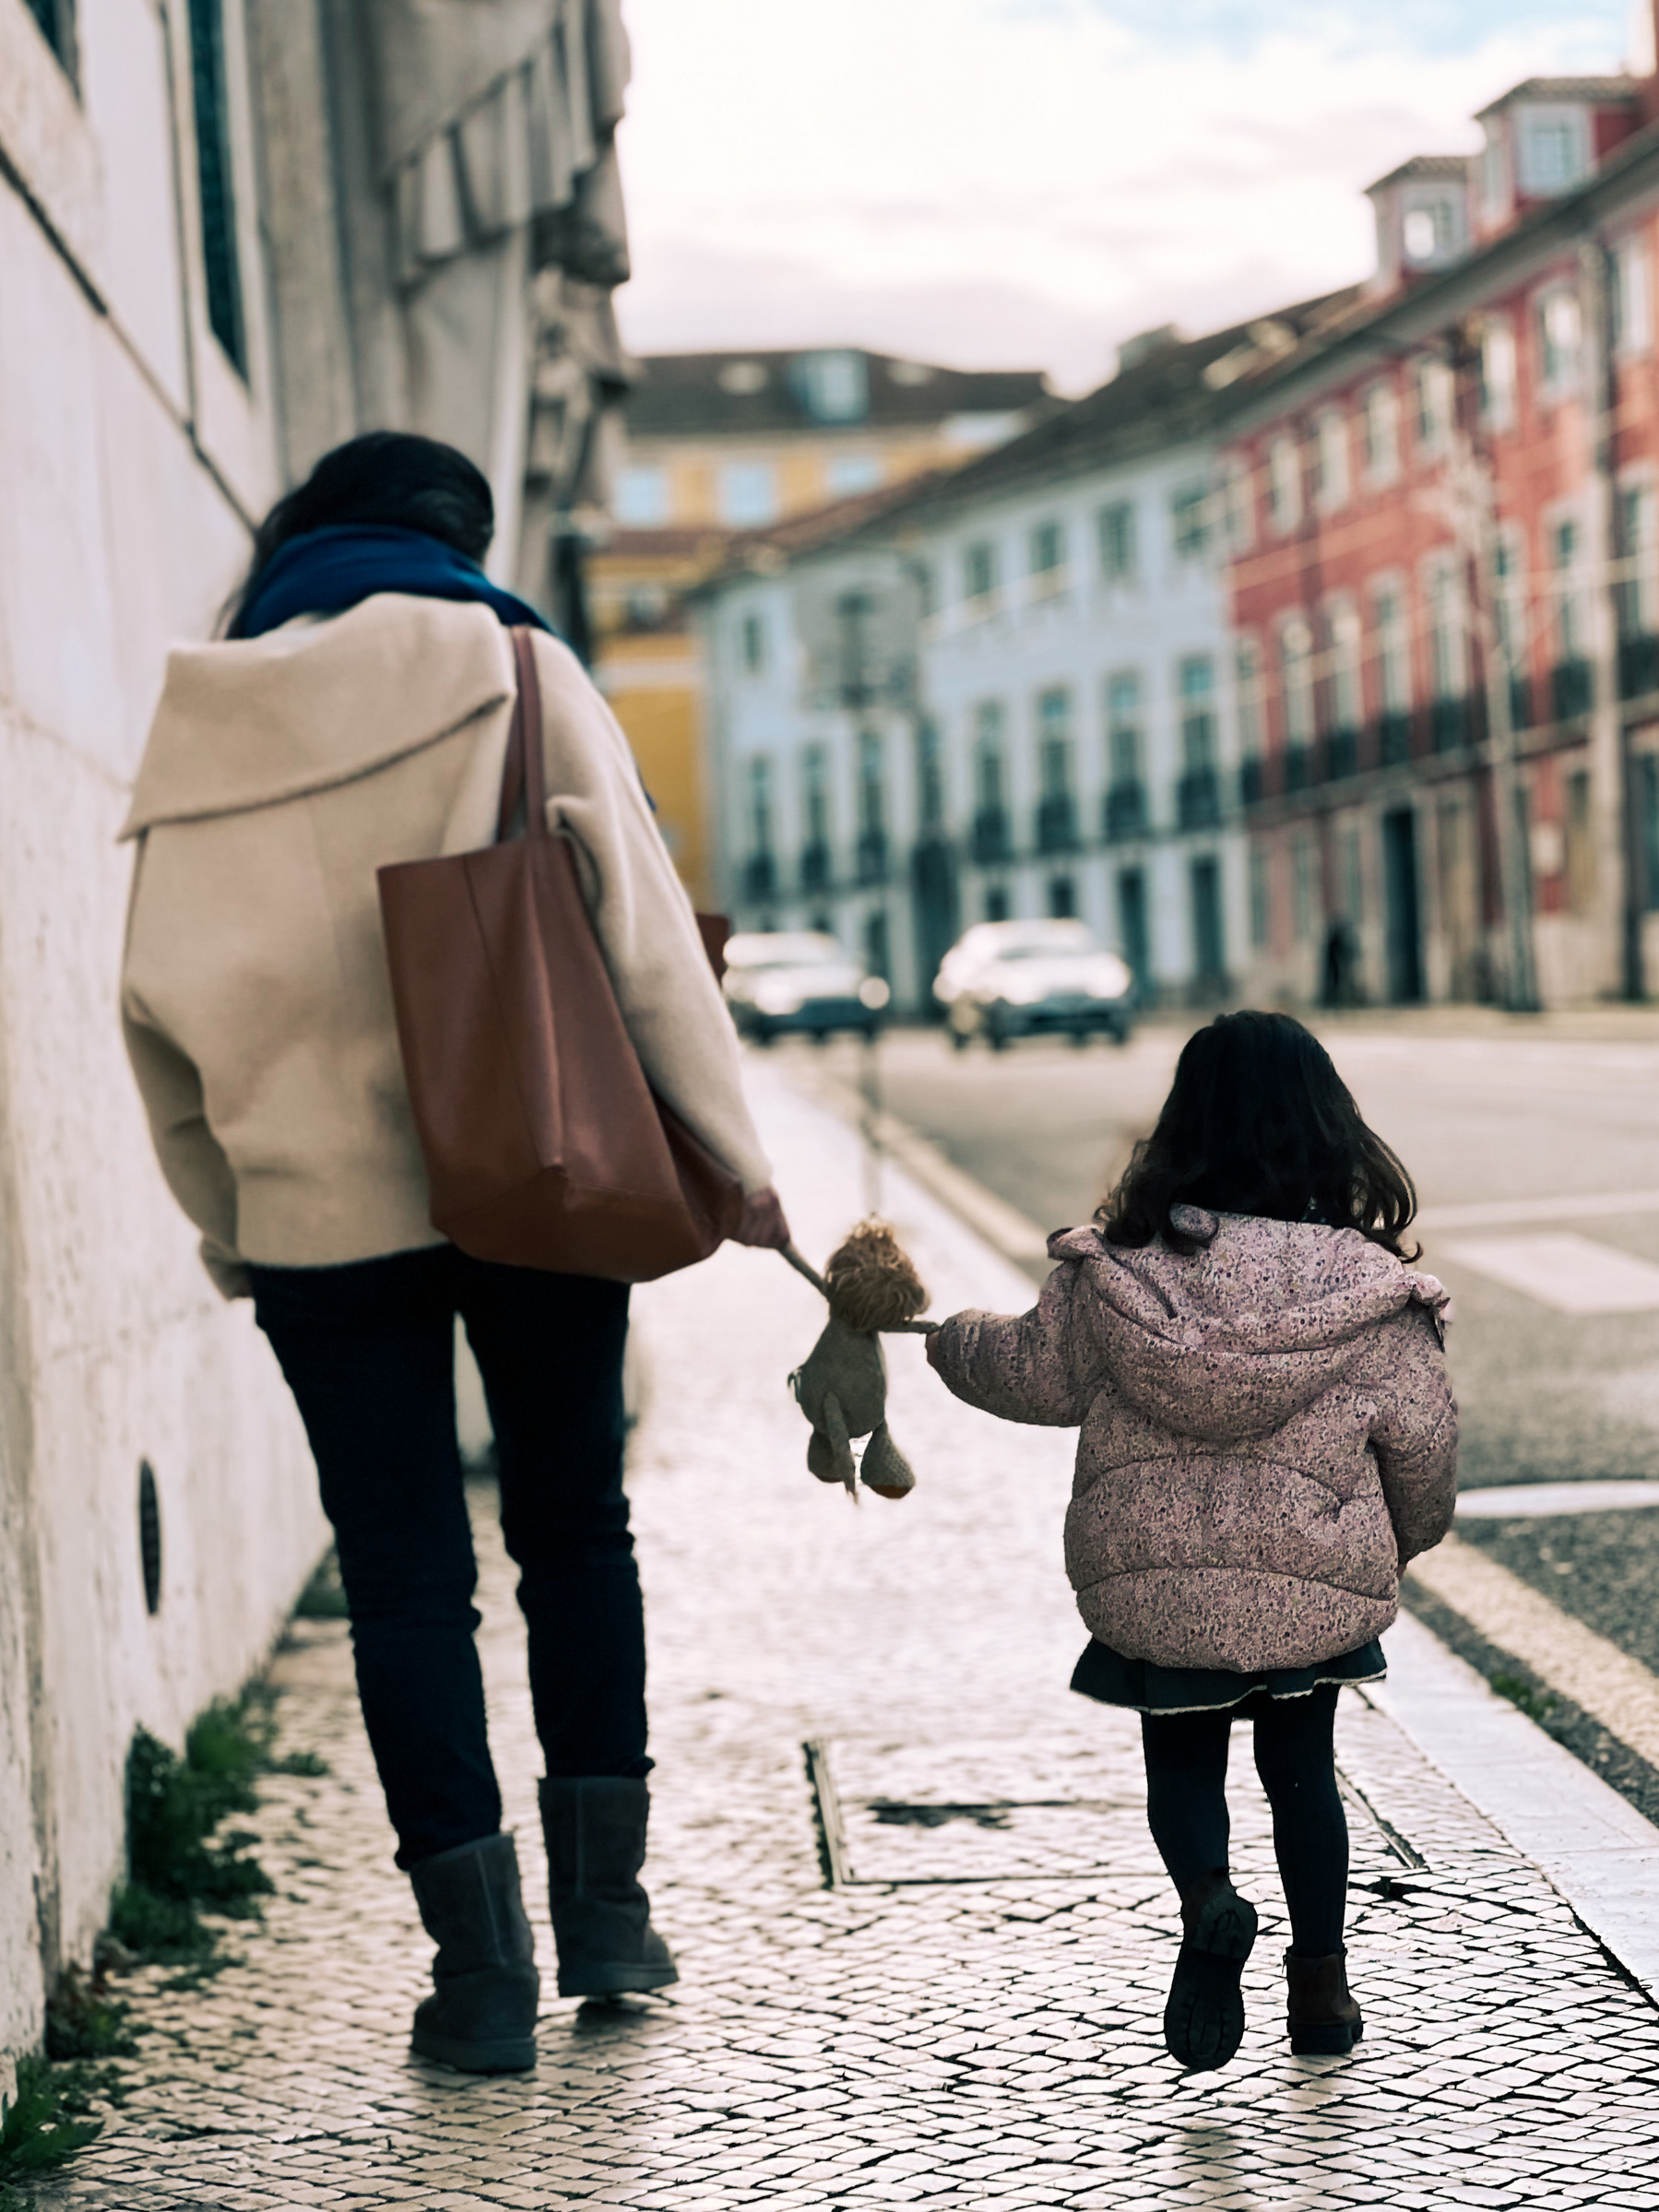 Adult and child walking hand in hand down a cobblestone street, holding a stuffed animal, with historic buildings in the background.